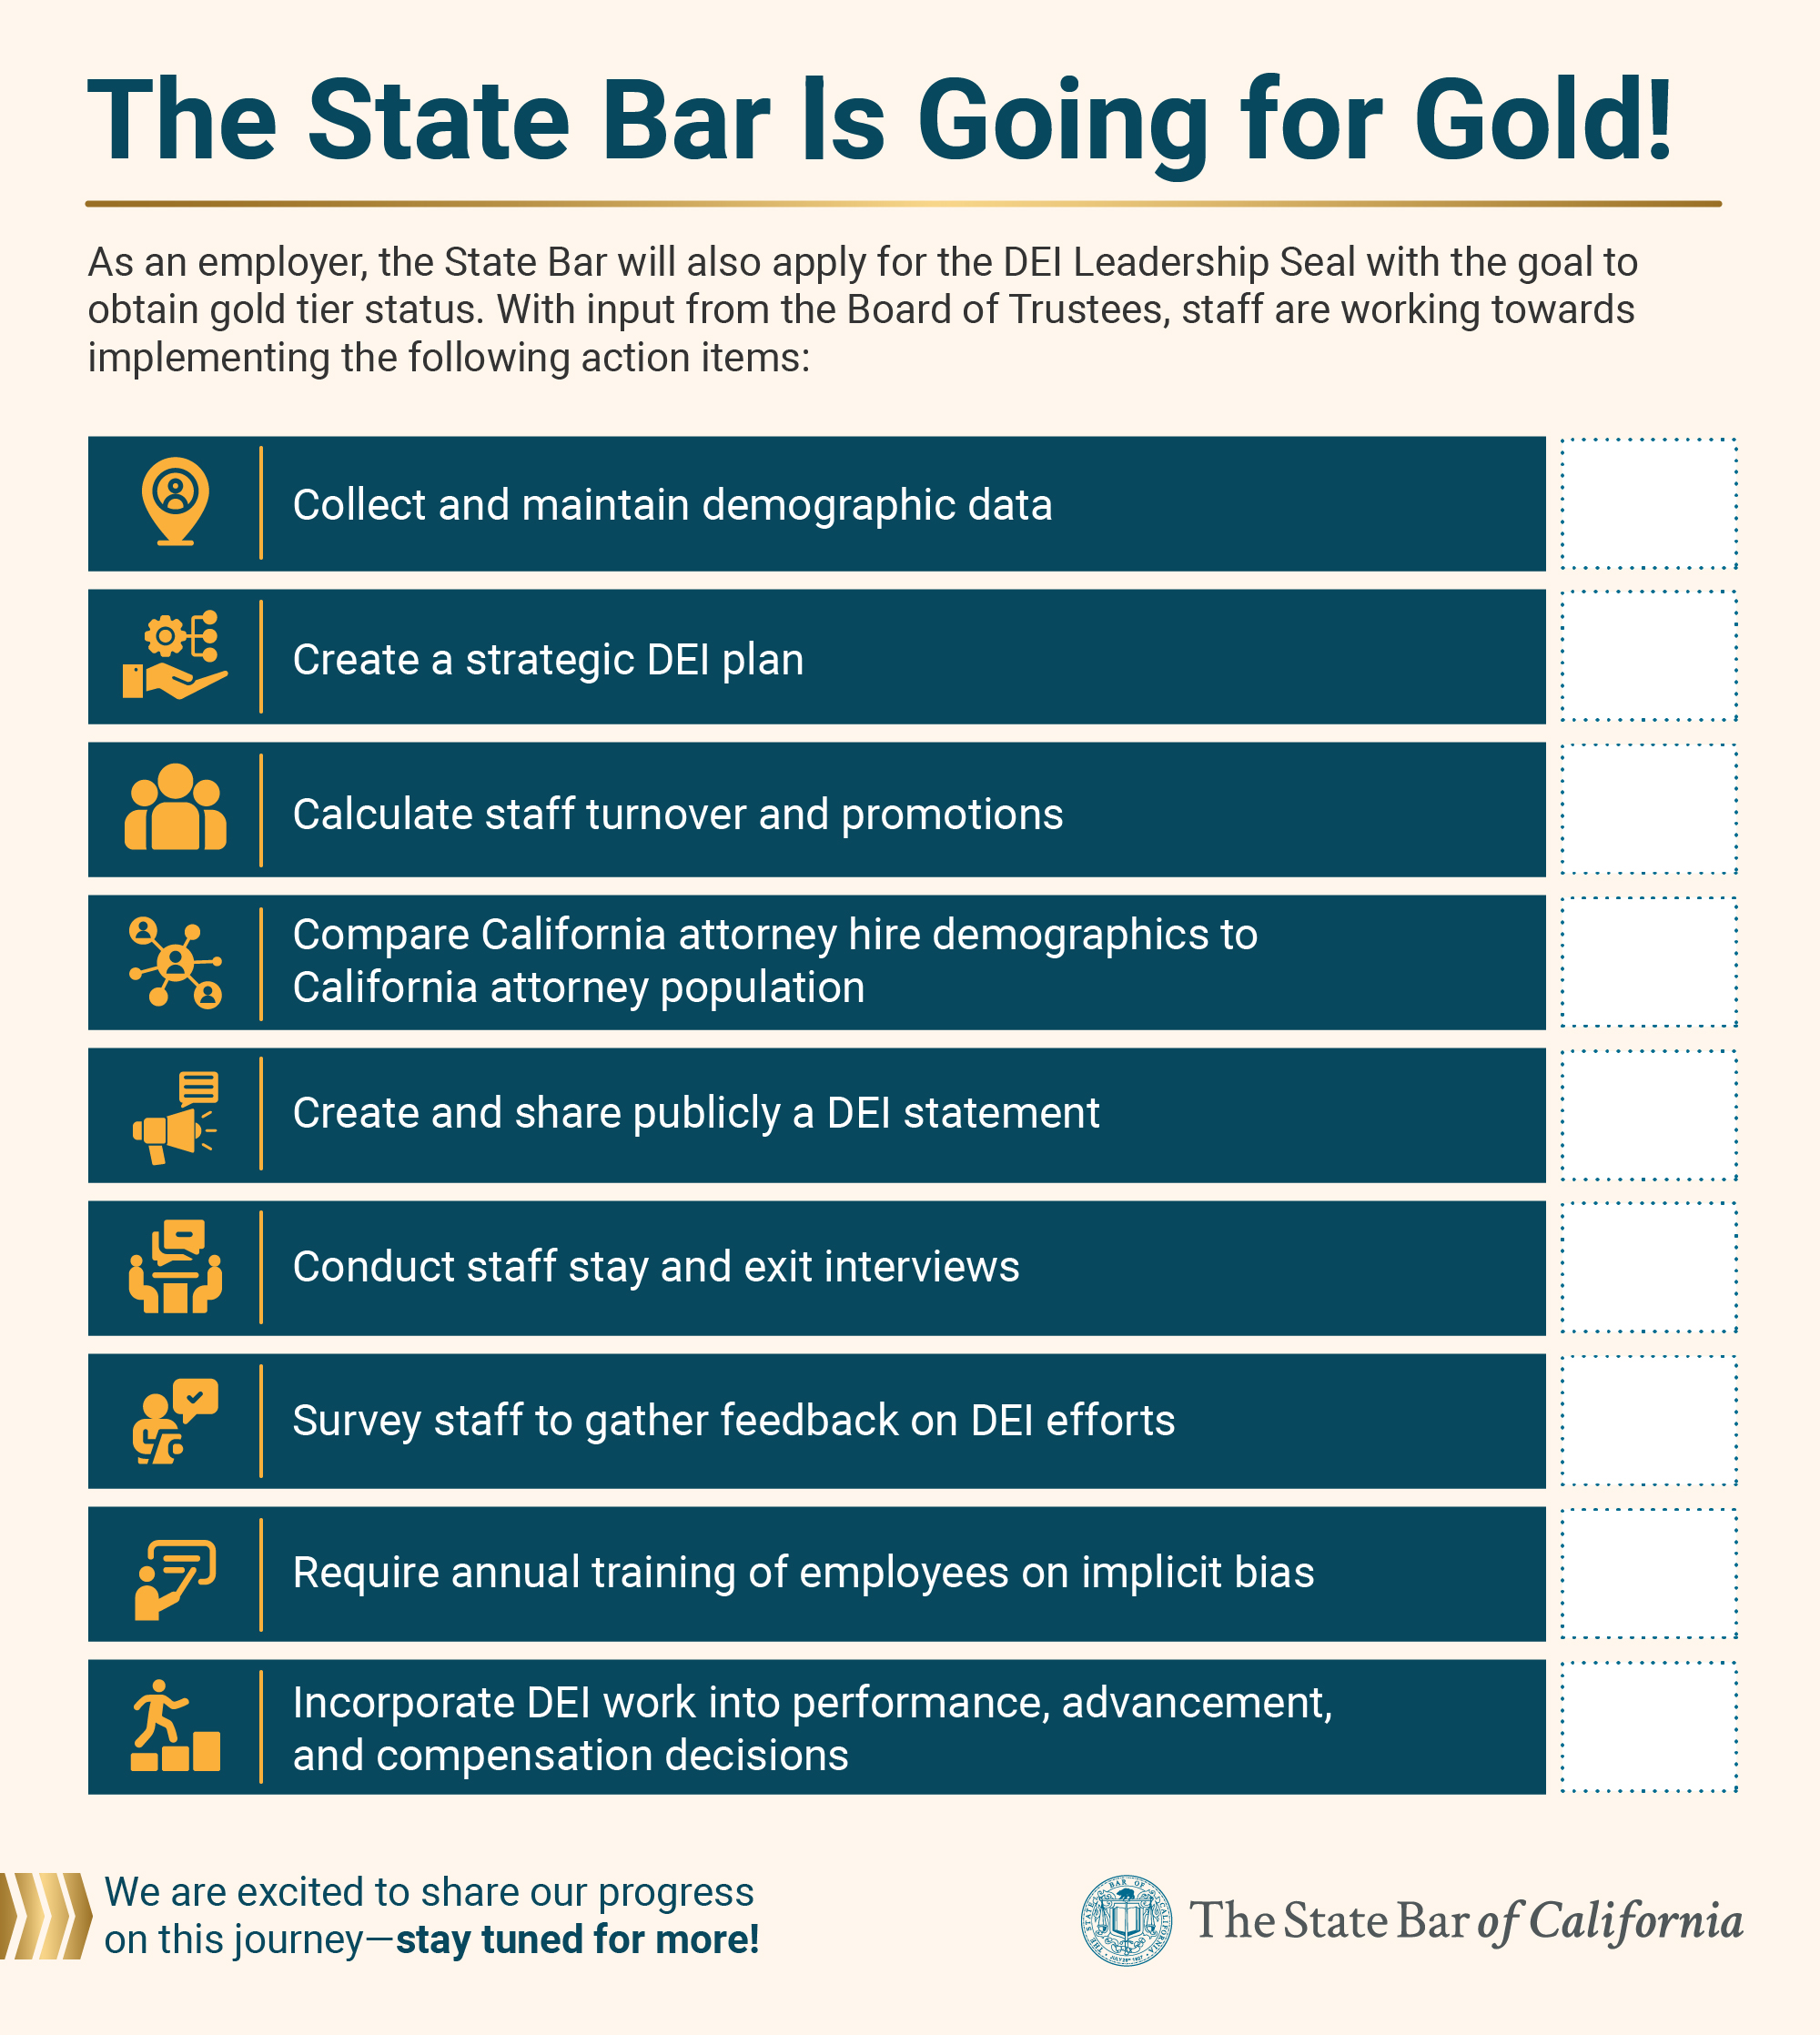 The State Bar is Going for Gold! As an employer, the State Bar will also apply for the DEI Leadership Seal with the goal to obtain gold tier status. With input from the Board of Trustees, staff are working towards implementing the following action items: 1.	Collect and maintain demographic data 2.Create a strategic DEI plan 3.Calculate staff turnover and promotions 4.Compare California attorney hire demographics to California attorney population 5.Create and share publicly a DEI statement 6.Conduct staff stay and exit interviews 7.Survey staff to gather feedback on DEI efforts 8.Require annual training of employees on implicit bias 9.Incorporate DEI work into performance, advancement, and compensation decisions We are excited to share our progress on this journey—stay tuned for more!